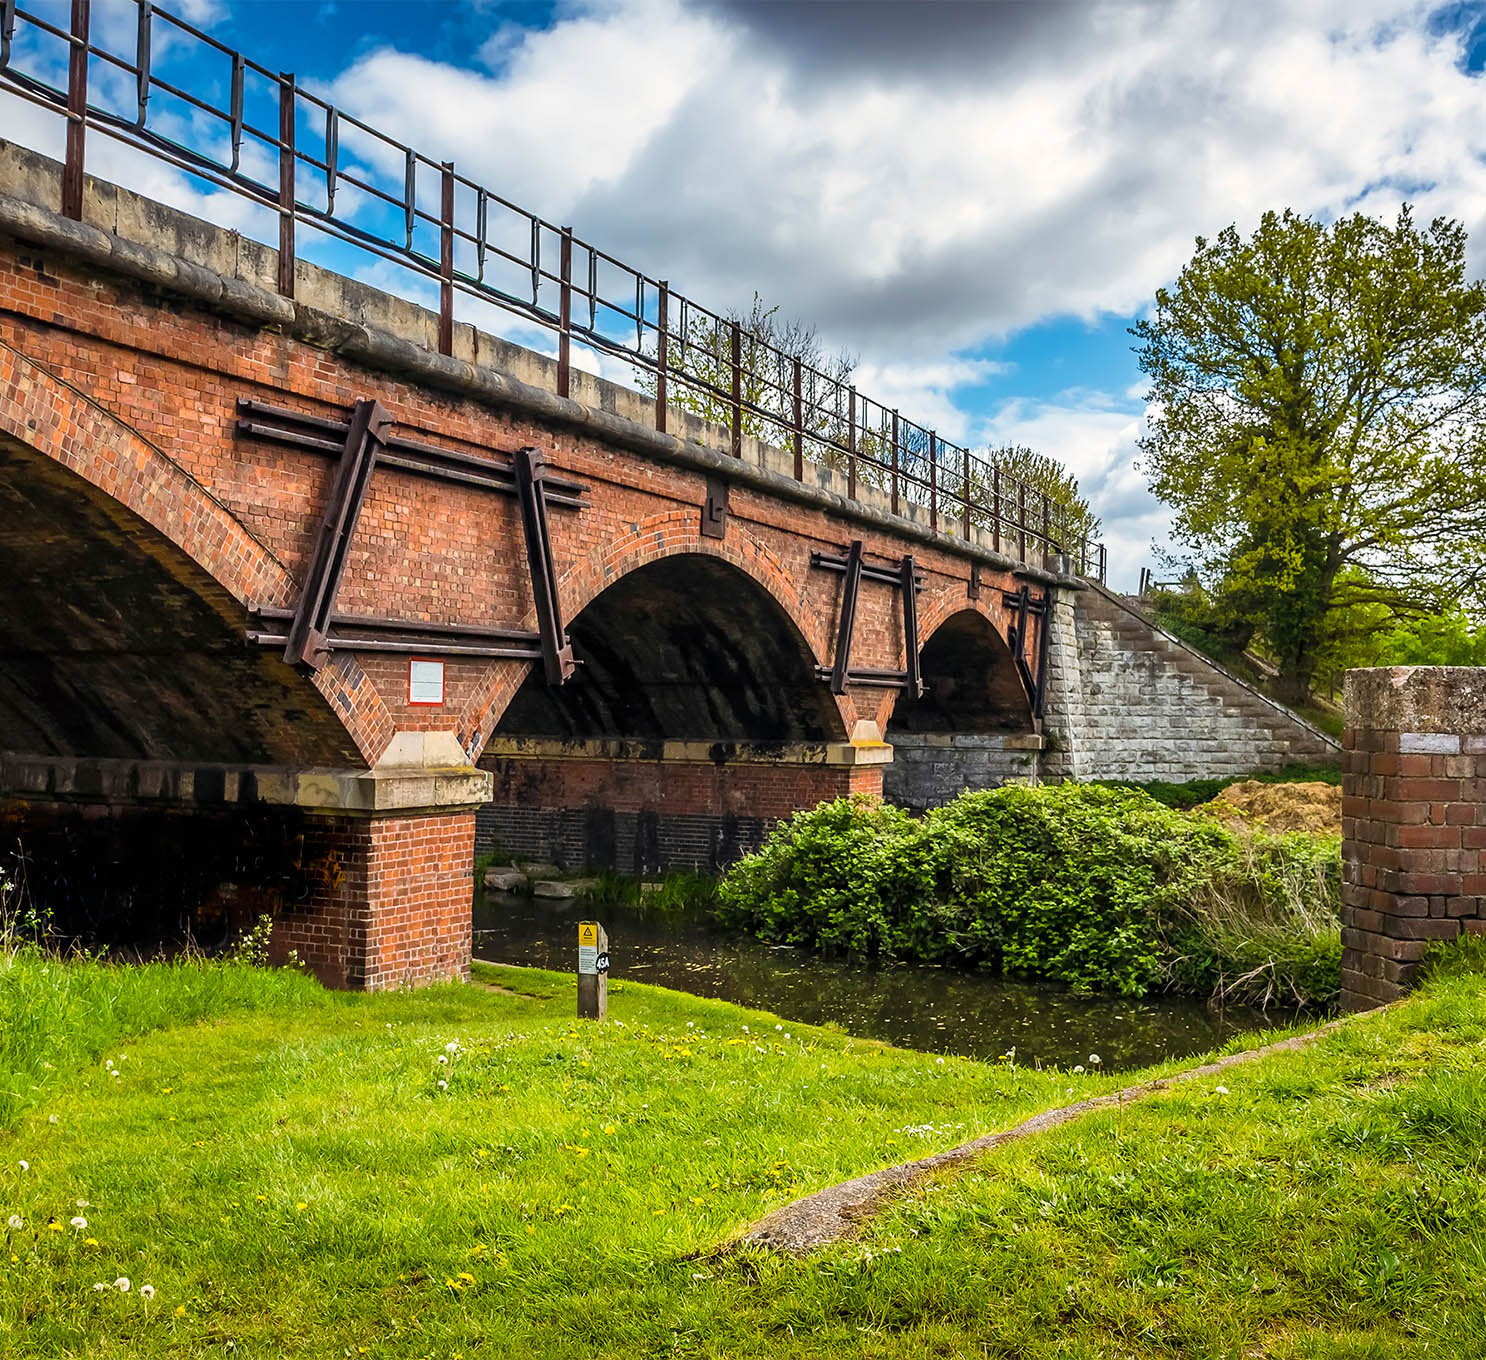 Manton railway viaduct over the Chesterfield canal